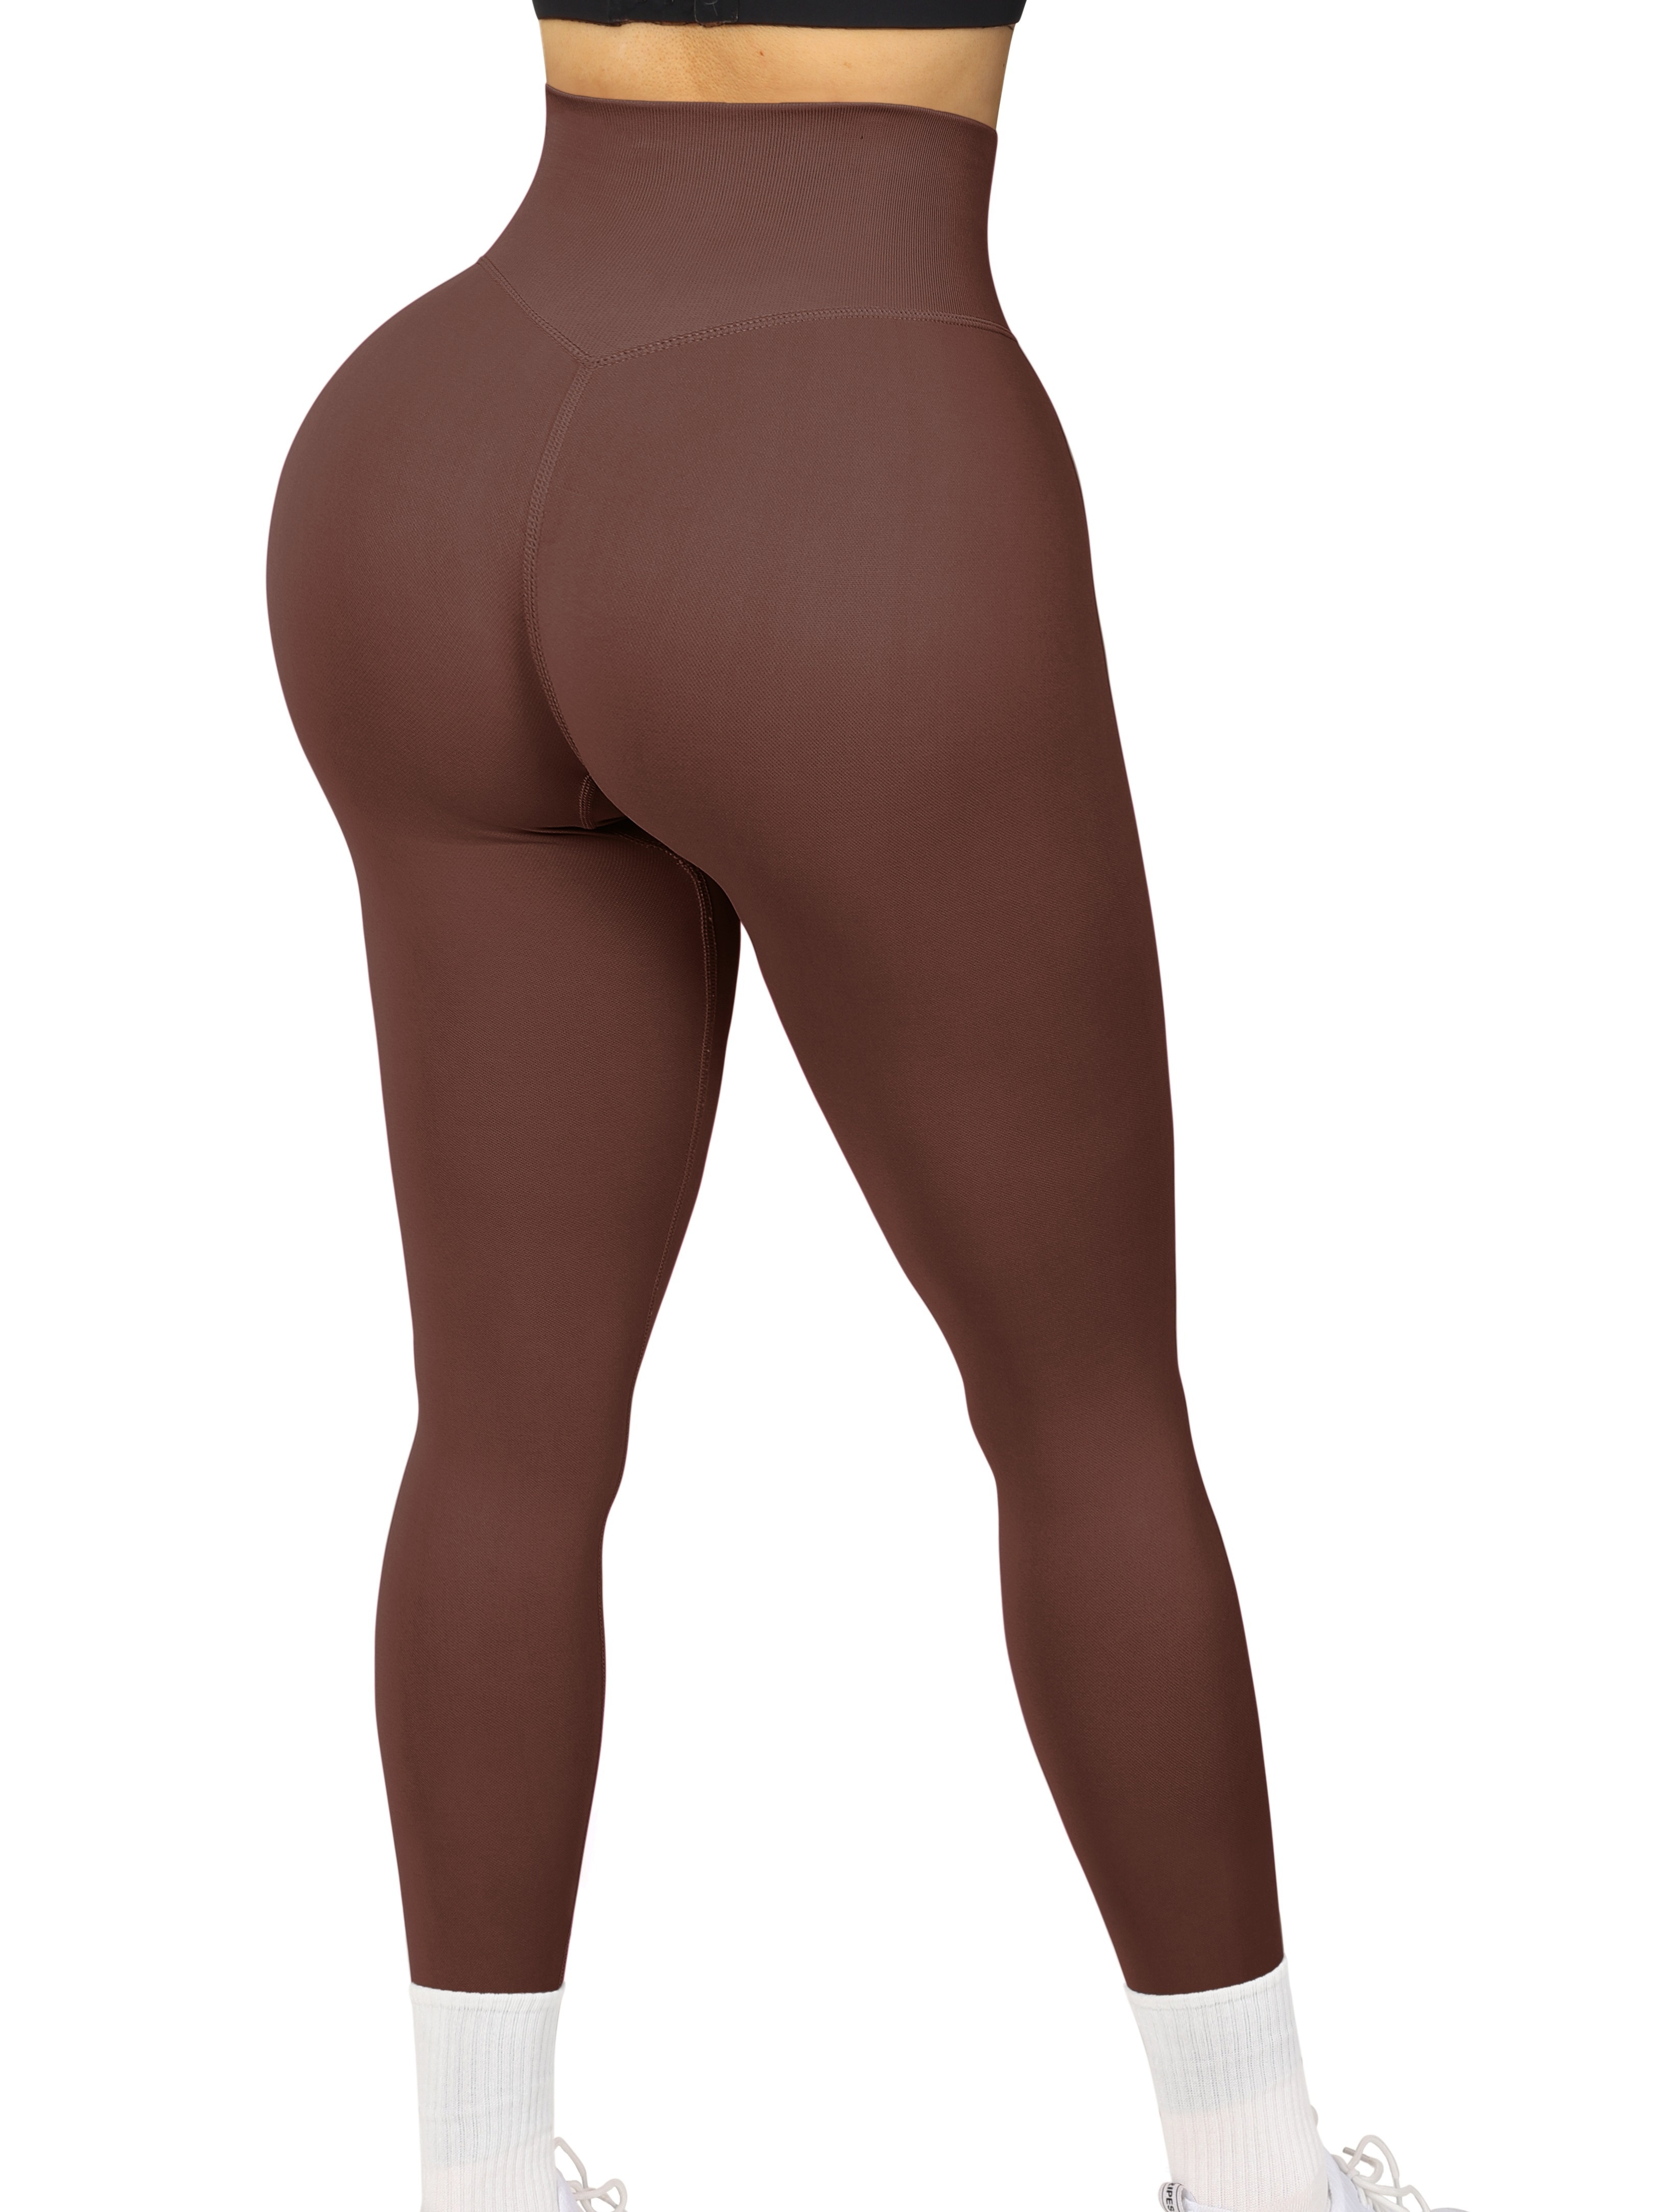 Jalioing Yoga Pant for Women Seamless Cropped High Waist Stretch Skinny  Flattering Soft Basic Workout Trouser (Medium, Brown)